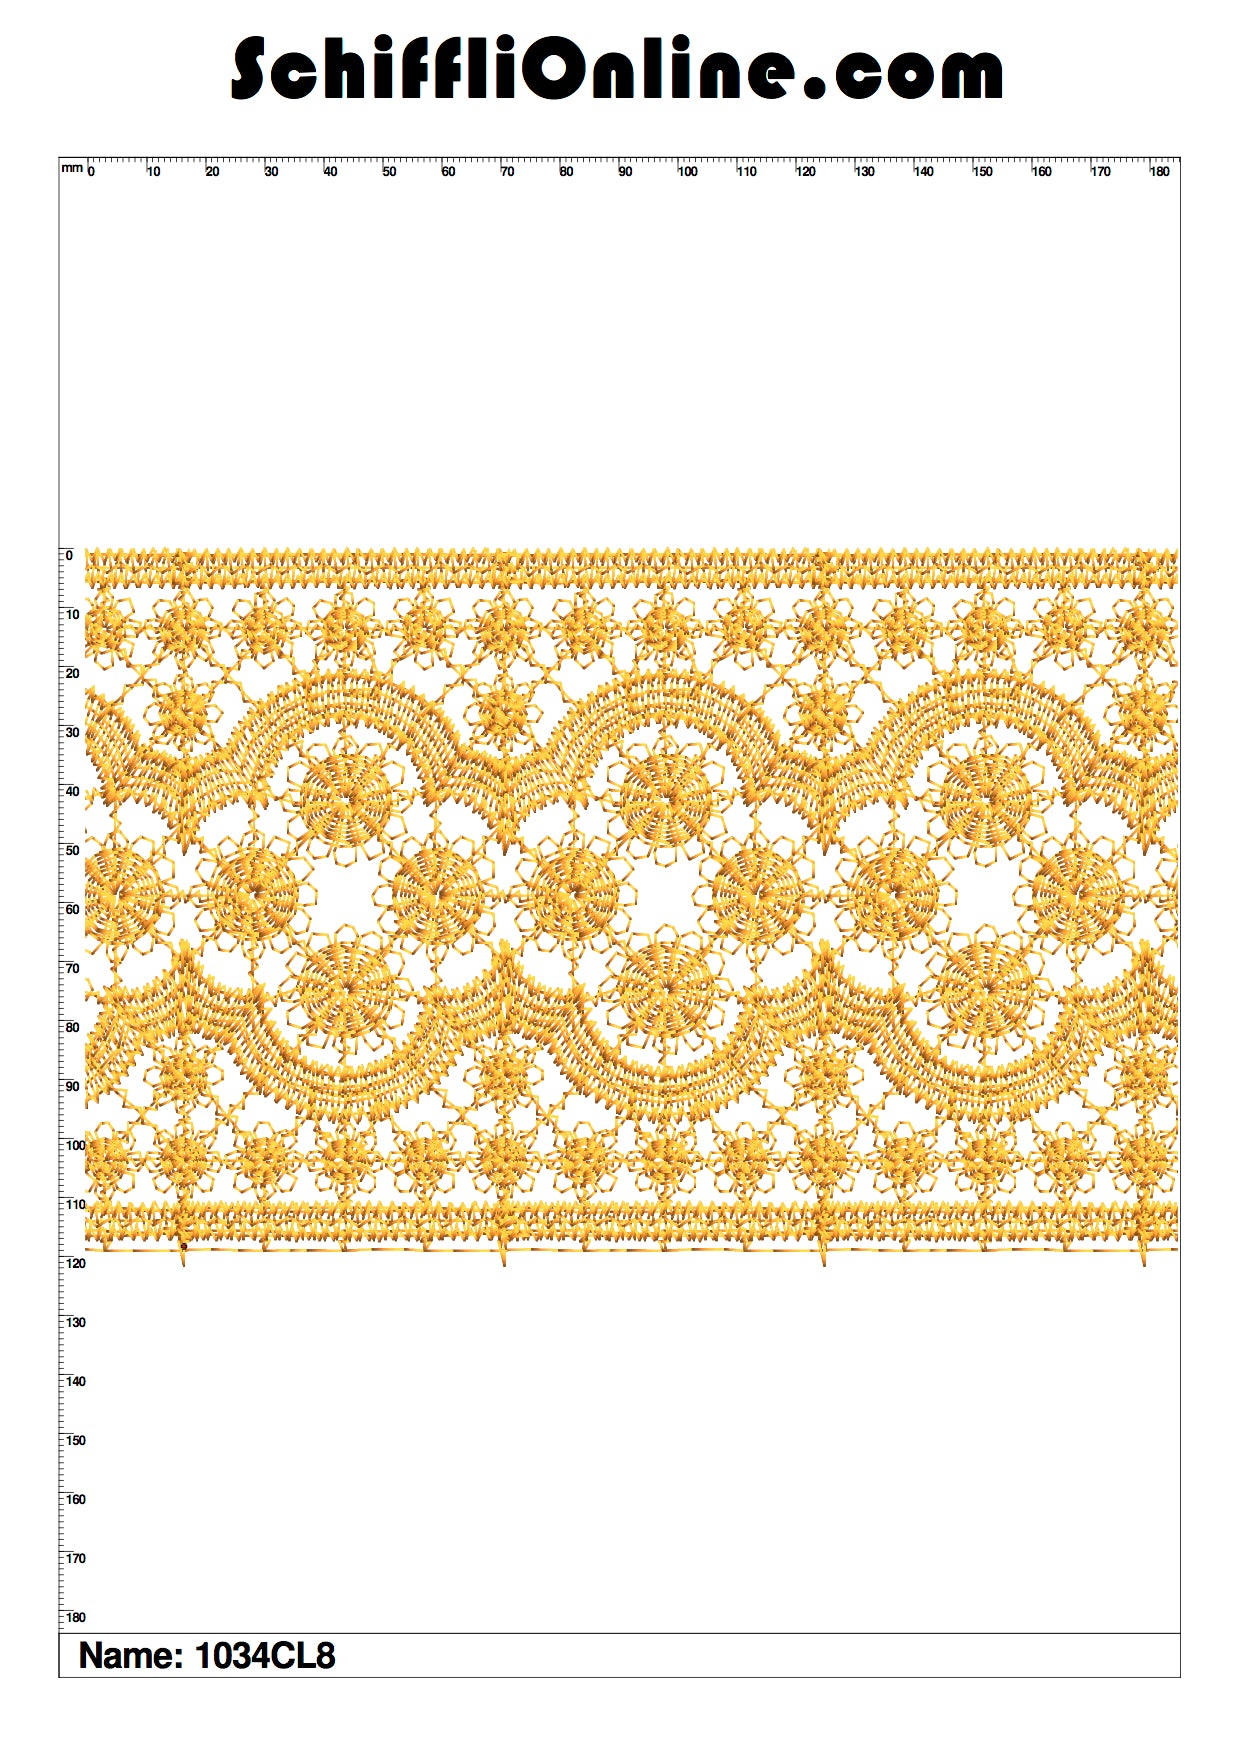 Book 132 CHEMICAL LACE 8X4 50 DESIGNS